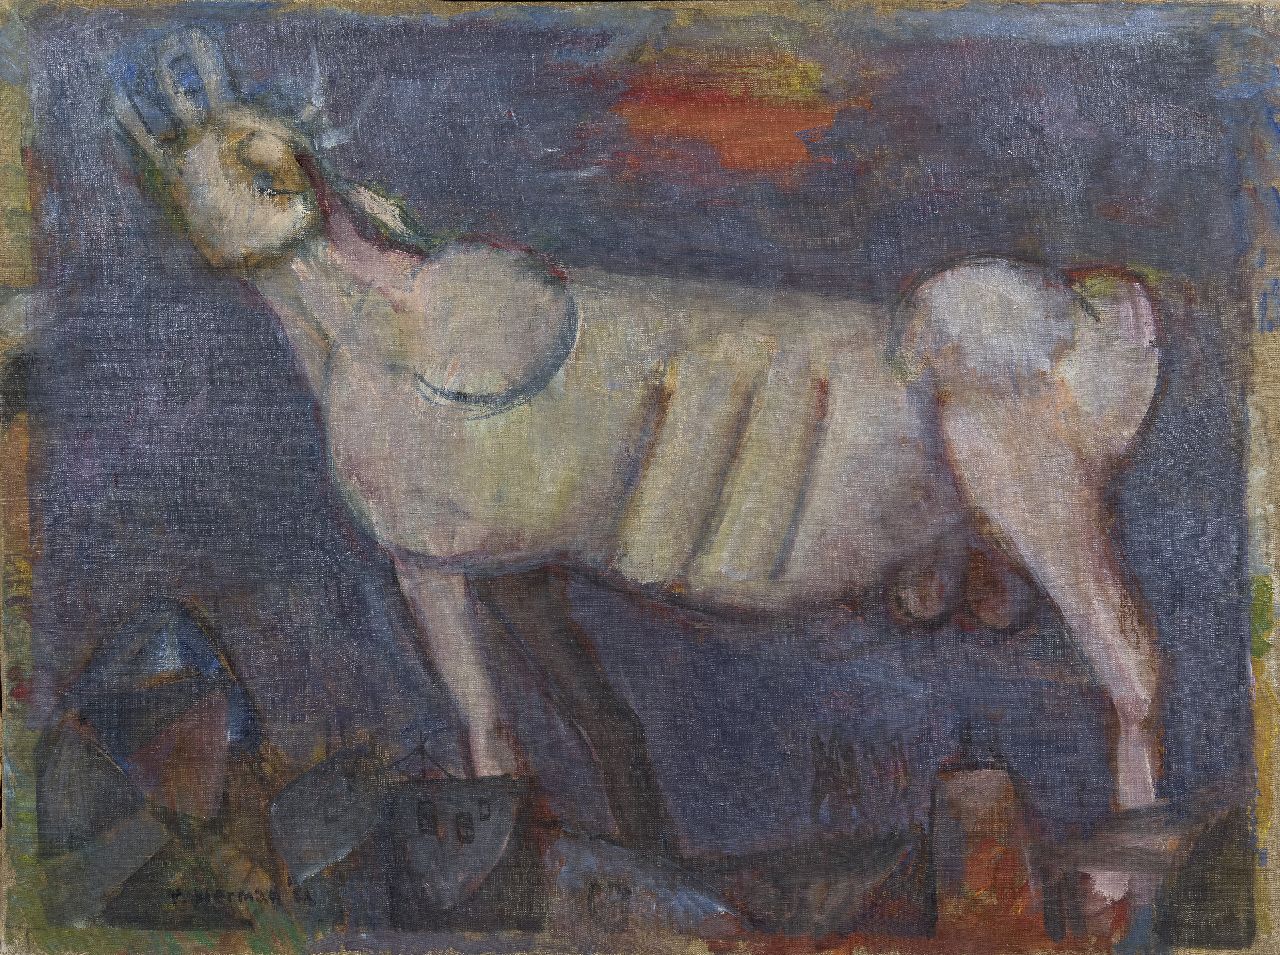 Bierman R.  | Rudi Bierman | Paintings offered for sale | Roaring bull, oil on canvas 60.5 x 80.5 cm, signed l.l. and on the reverse and dated '52, without frame